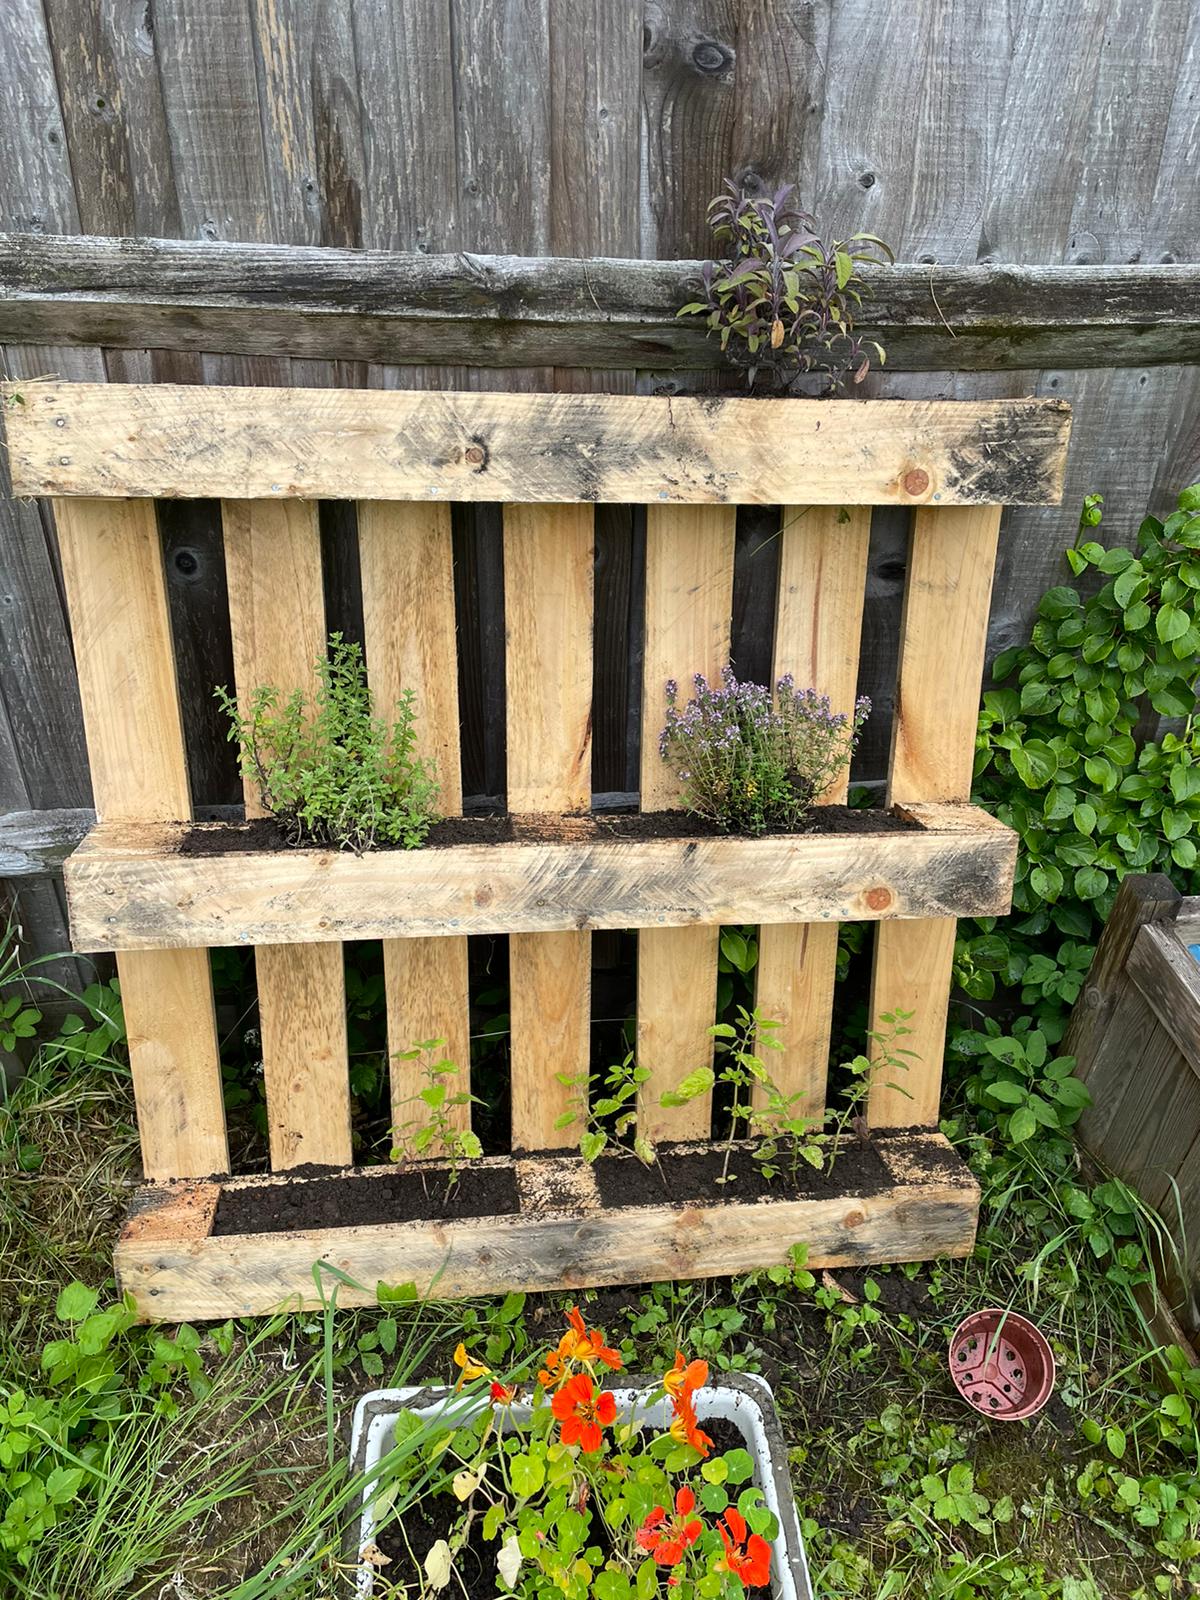 A really clever idea - herbs planted in a pallet